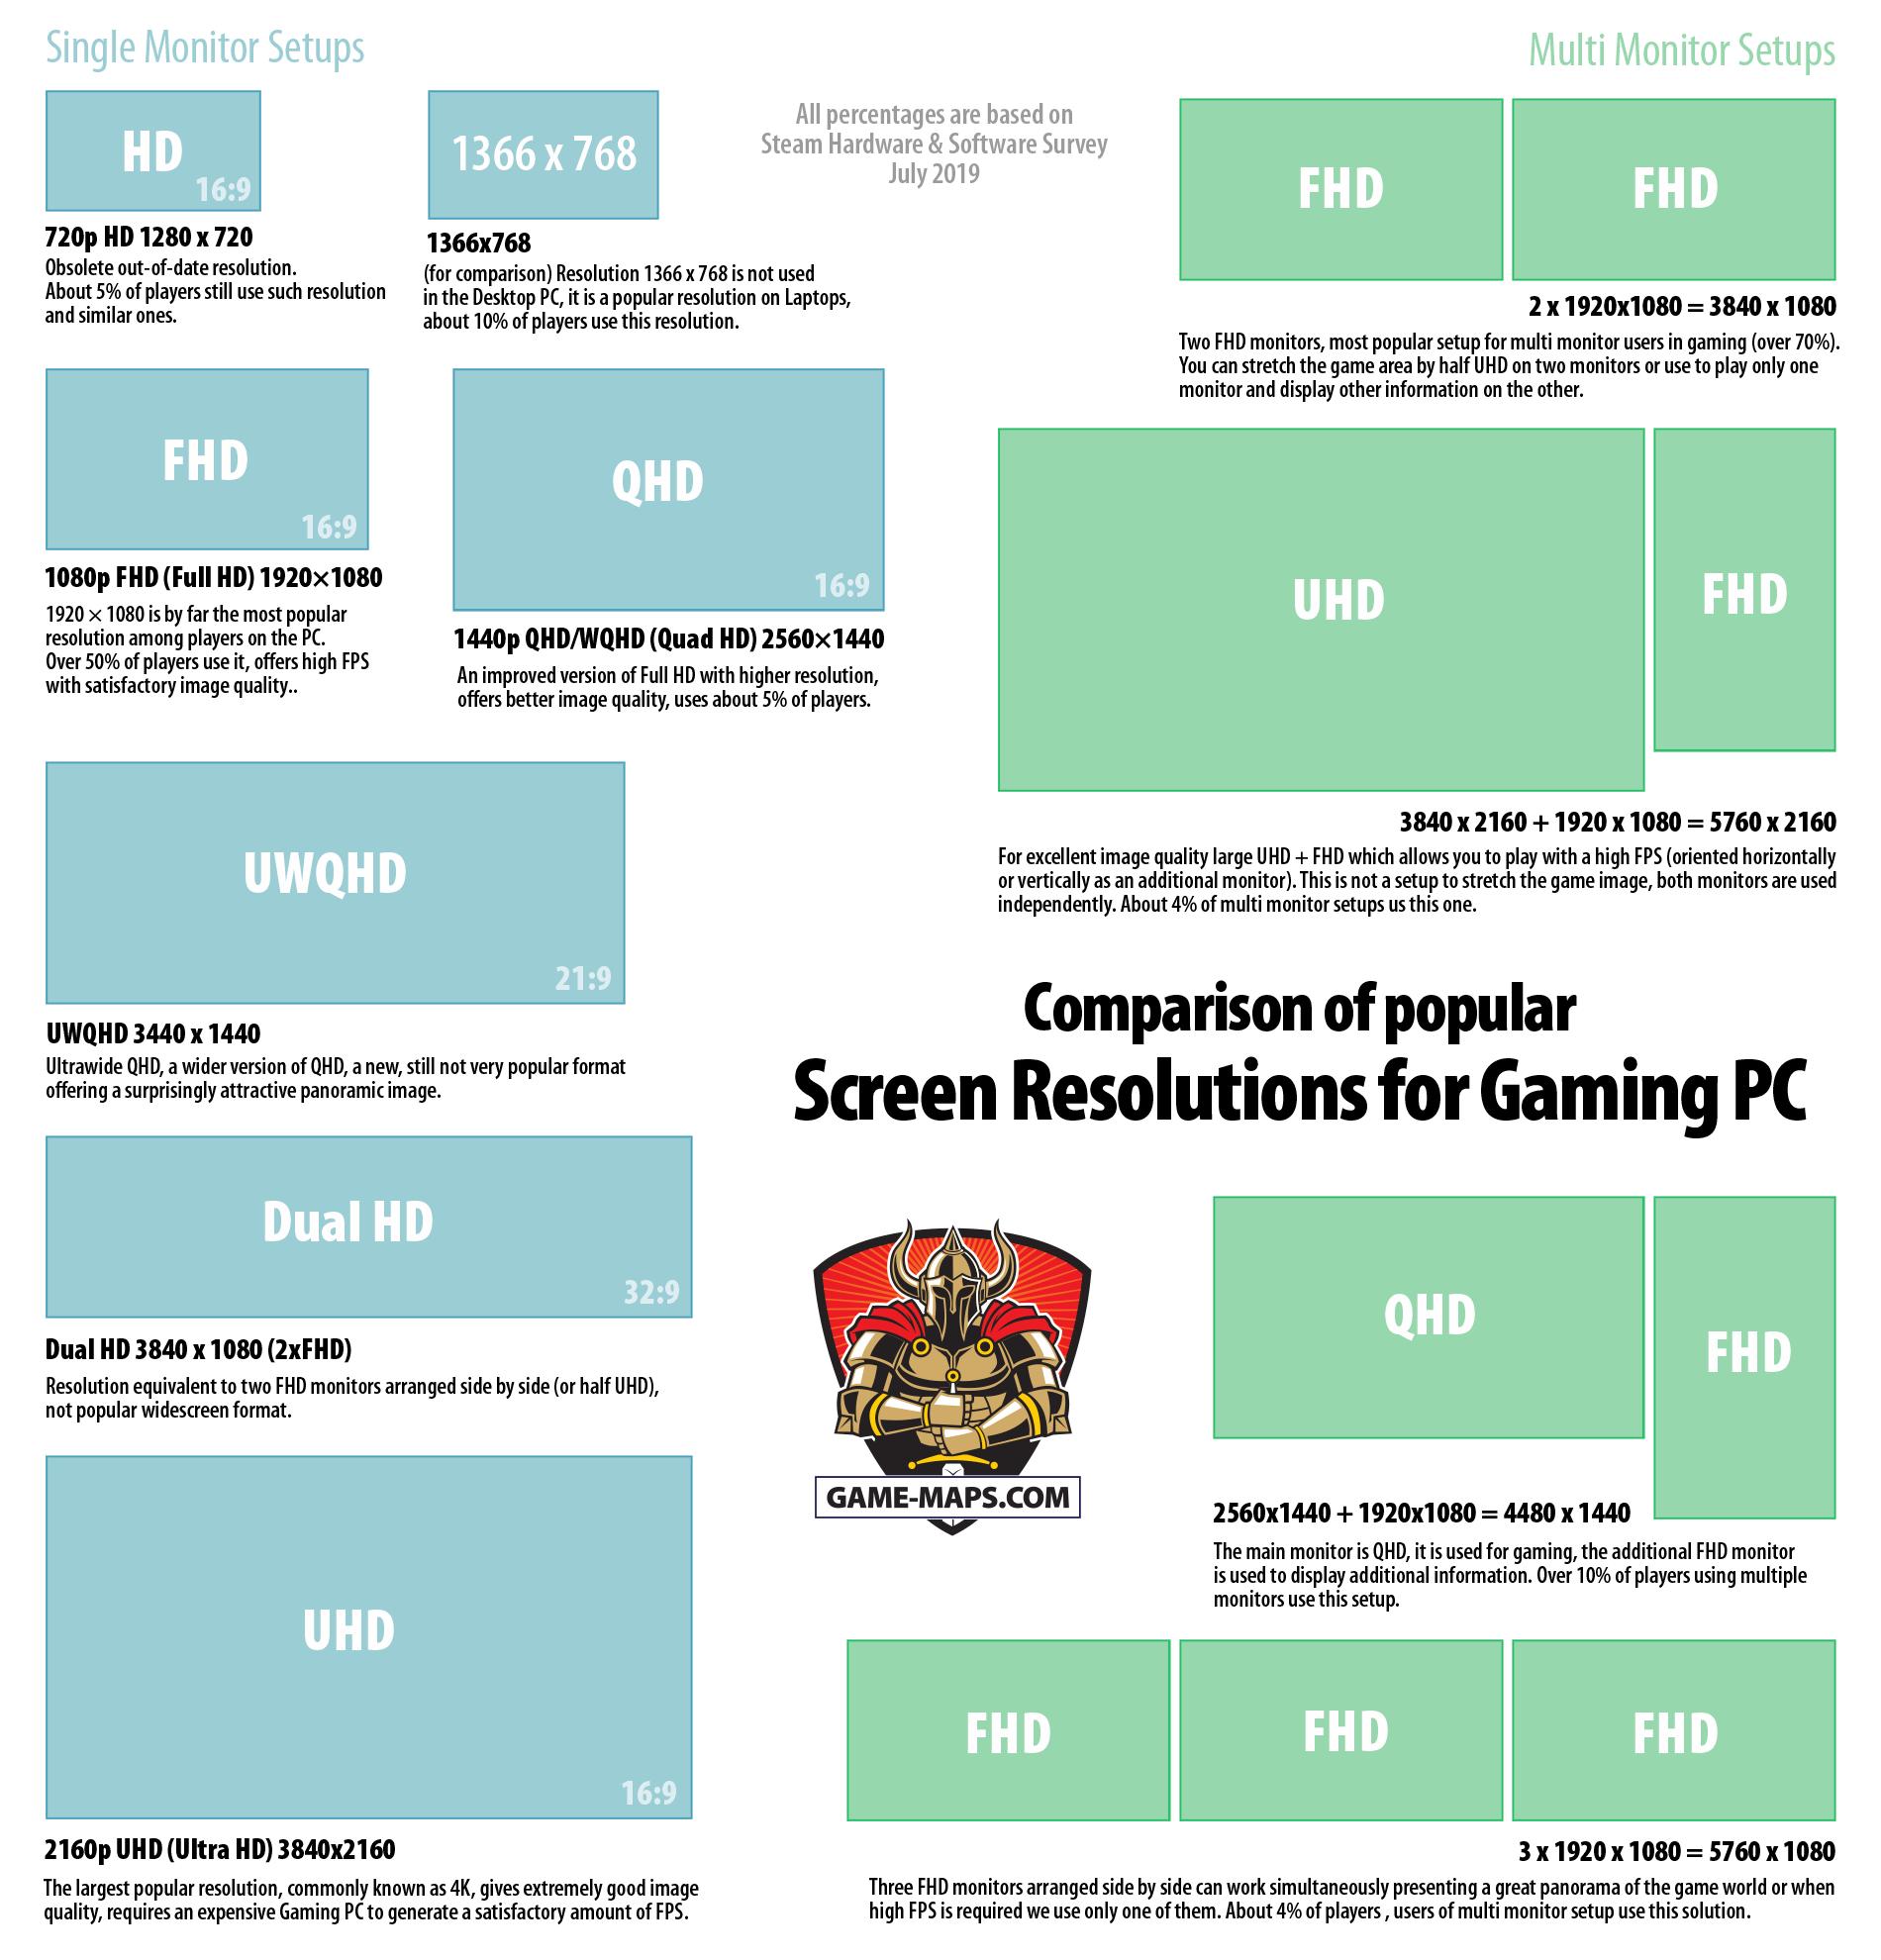 Comparison of popular Screen Resolutions for Gaming PC